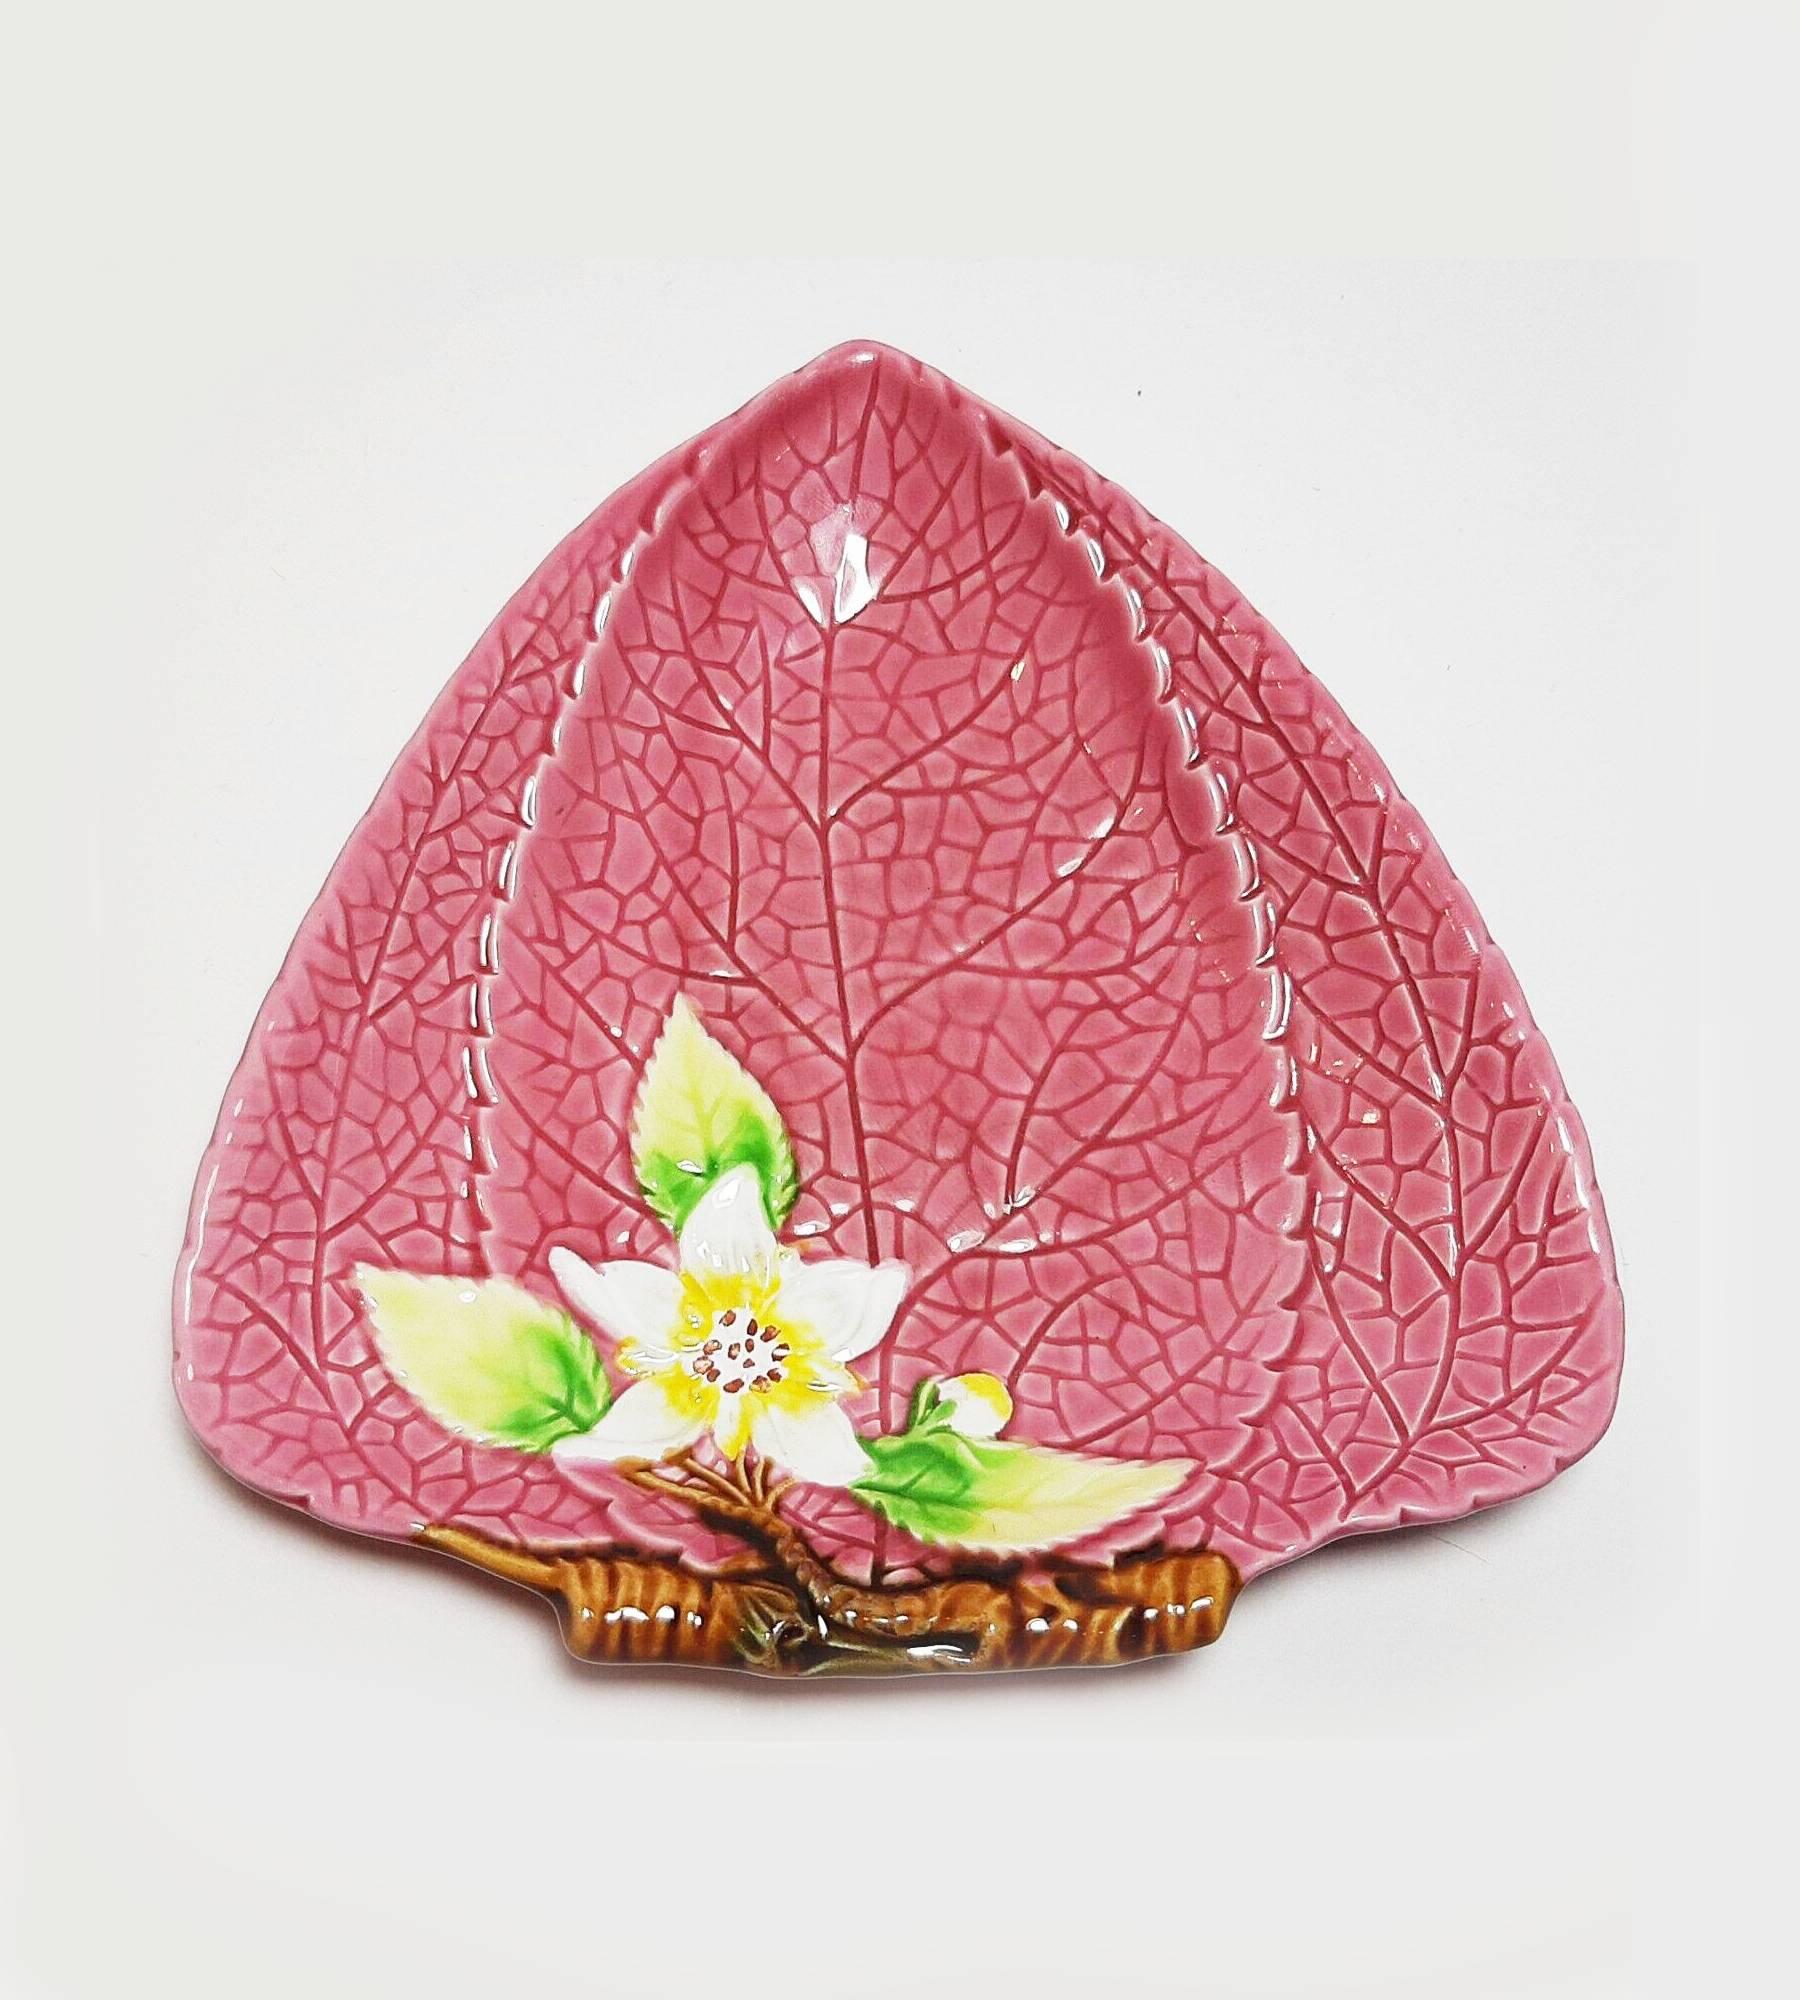 Christian Dior Ceramic Decorative Bow, pink leaves and flowers  This elegant piece stands out with its timeless glazing, making it a perfect statement piece for any room.

Condition: 1980s, vintage, very good 

Dimensions: 17x17cm / 6.6x6.6in 